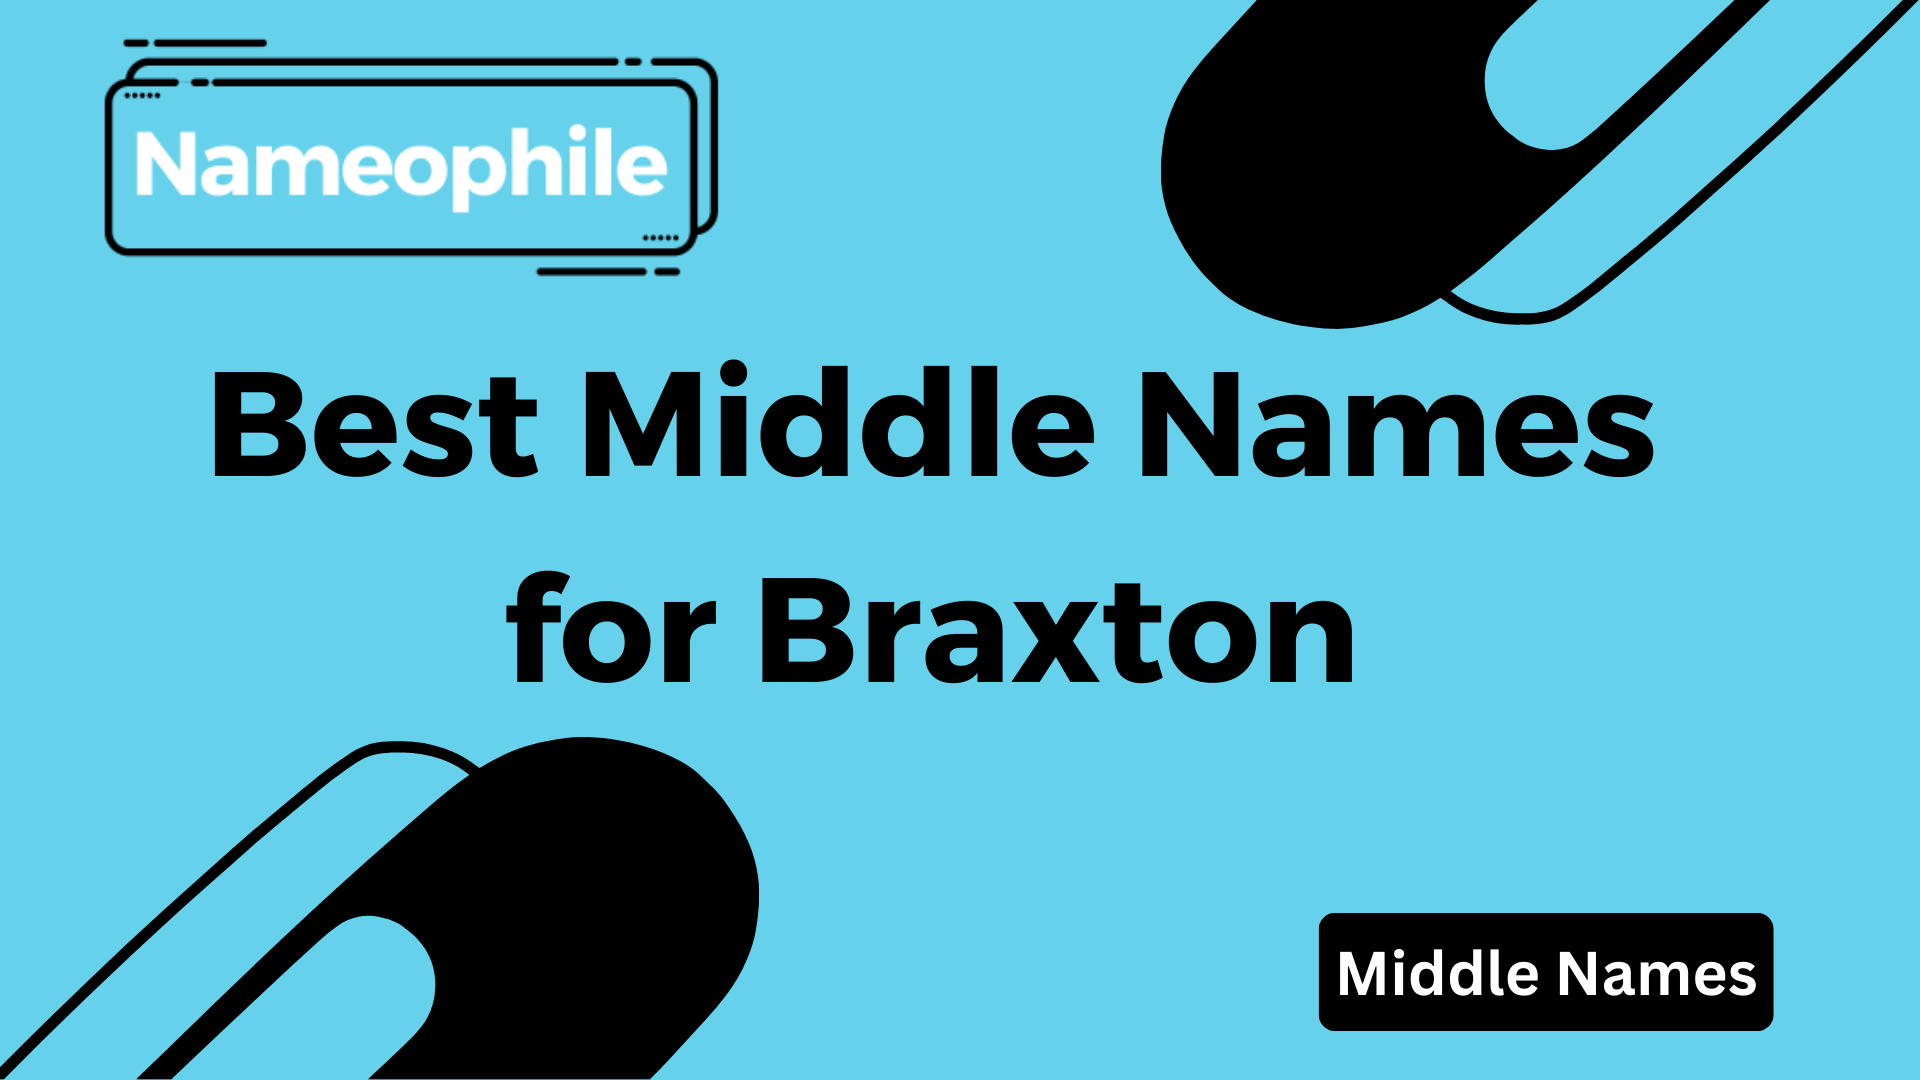 Best Middle Names for Braxton